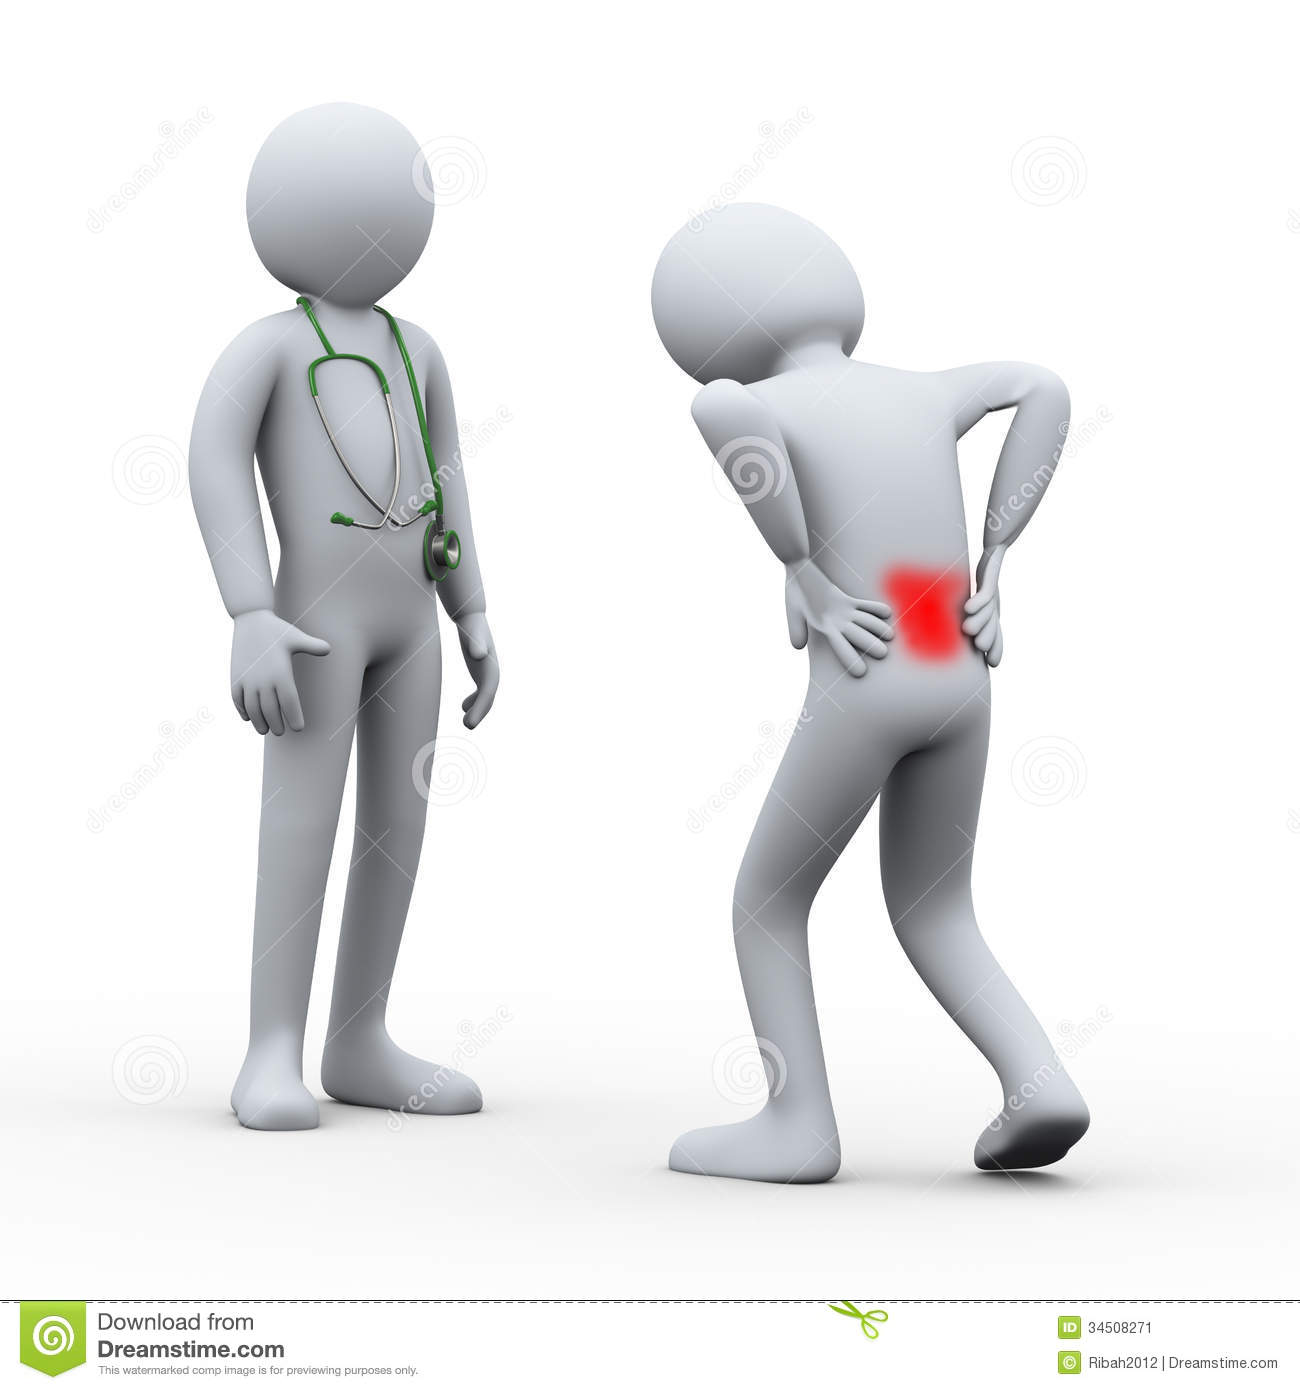 3d Person With Back Pain Visiting Doctor Stock Image   Image  34508271